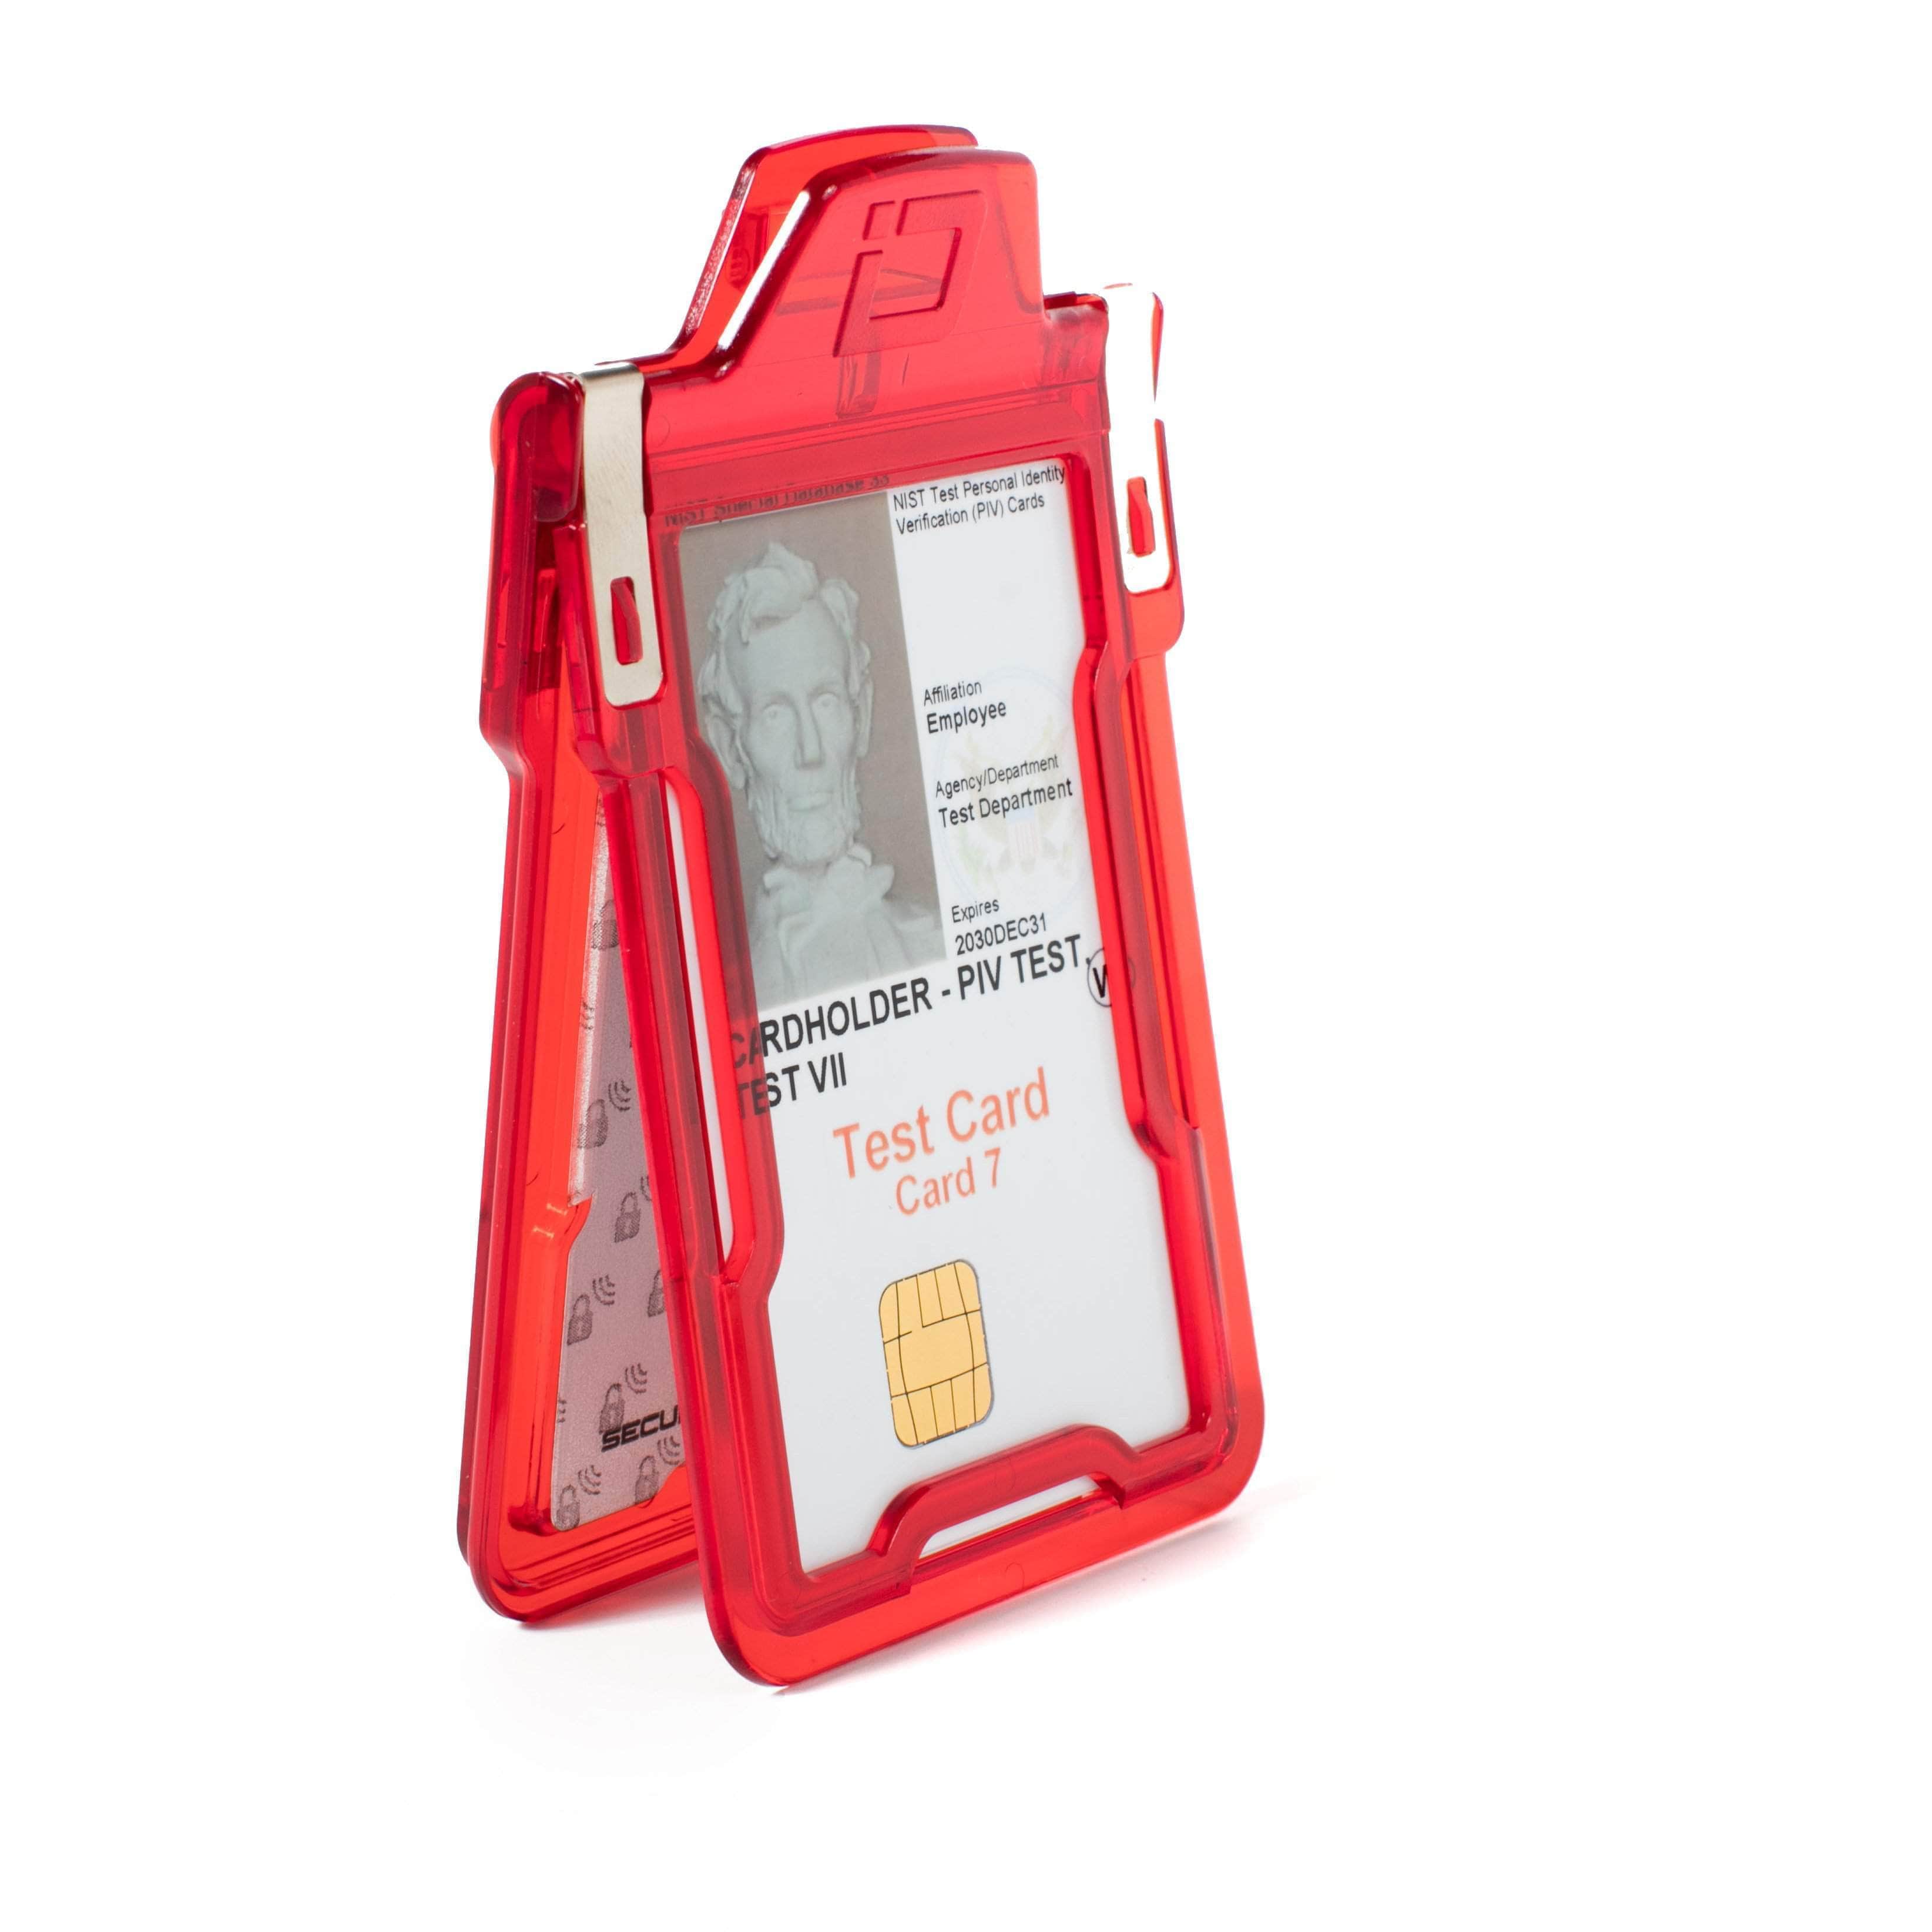 ID Stronghold Badgeholder BloxProx Red Secure Badge Holder with BloxProx™ - Protects 125Khz HID Prox 1 Card Holder